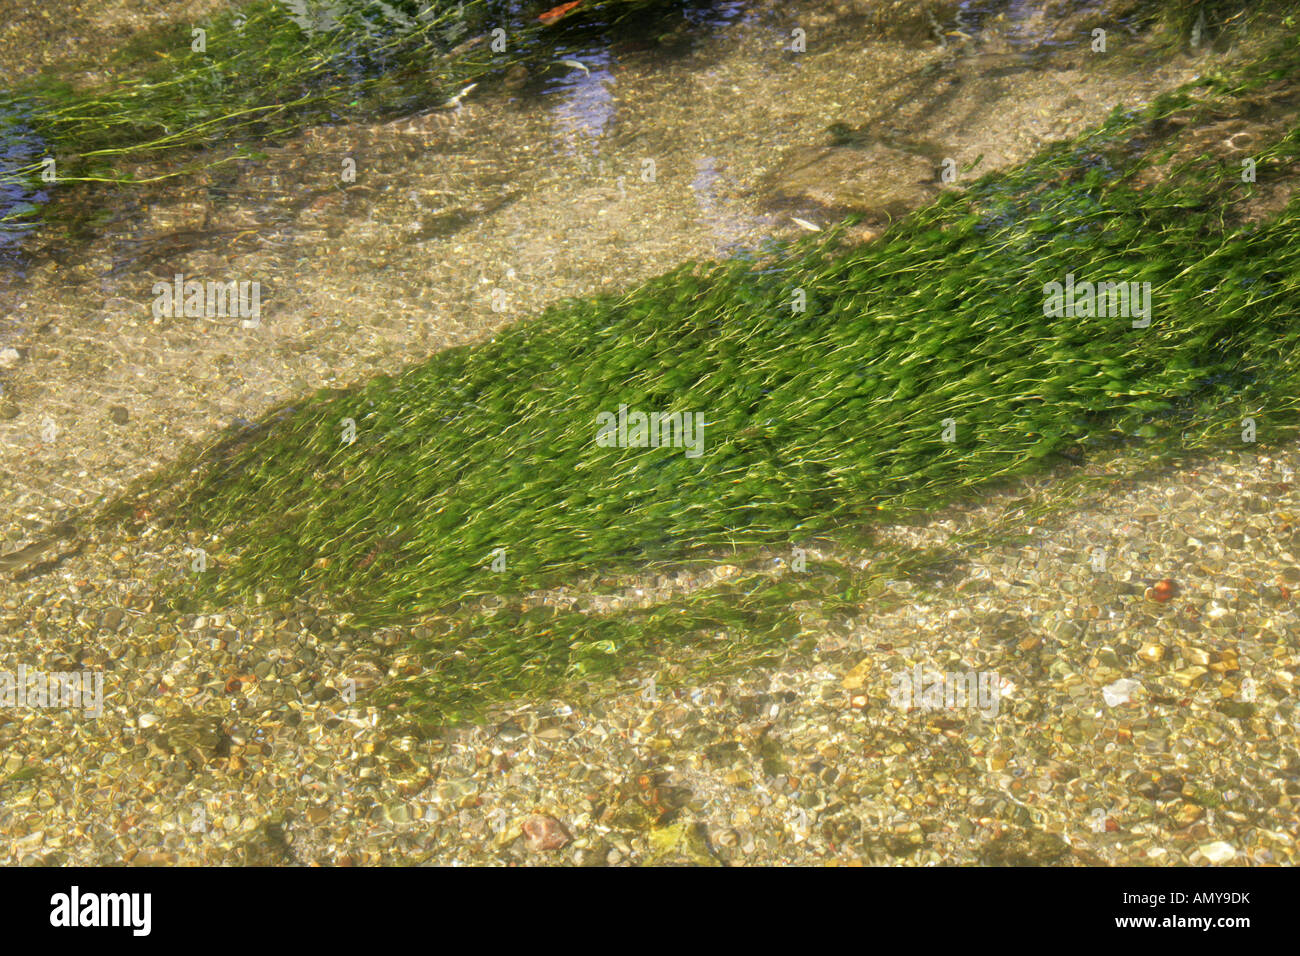 Spiked Water Milfoil, Myriophyllum spicatum, Haloragidaceae or Haloragaceae Growing in the Fast Flowing Water of the River Chess Stock Photo